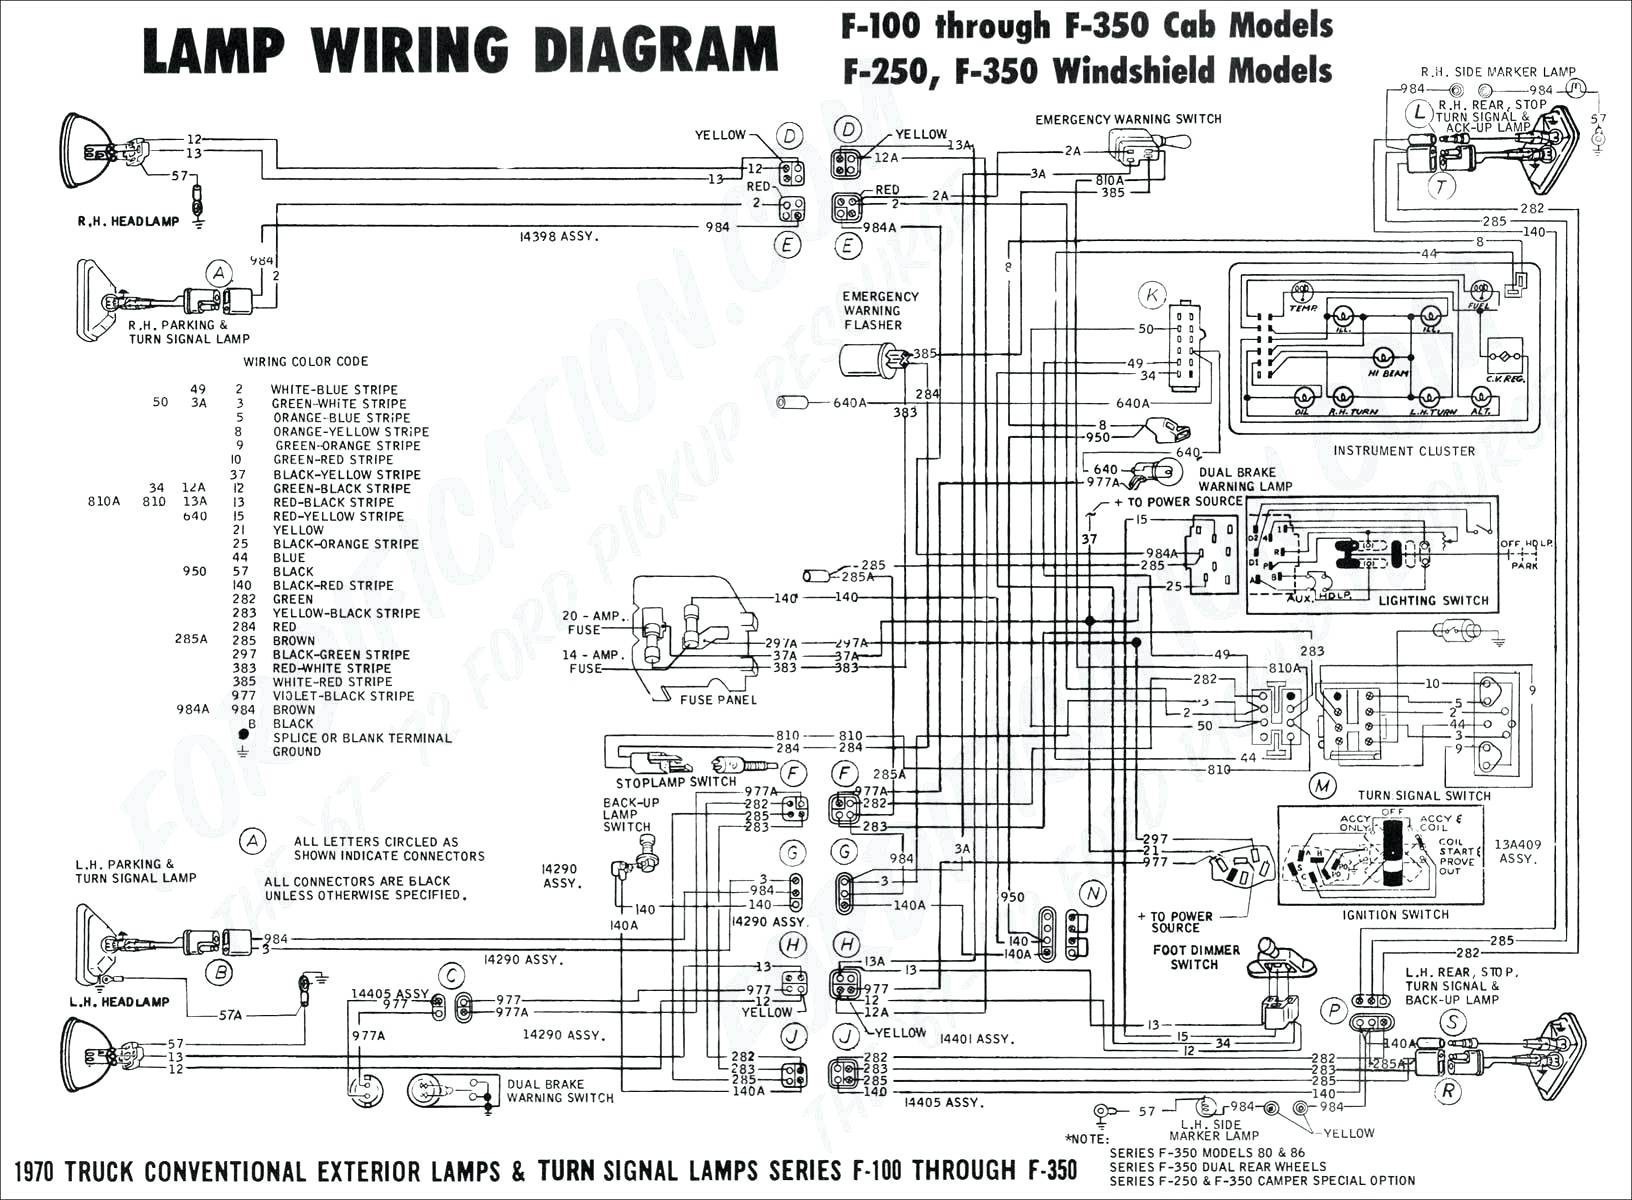 wiring diagram to her with wiring diagram to her with trailer rh efluencia co